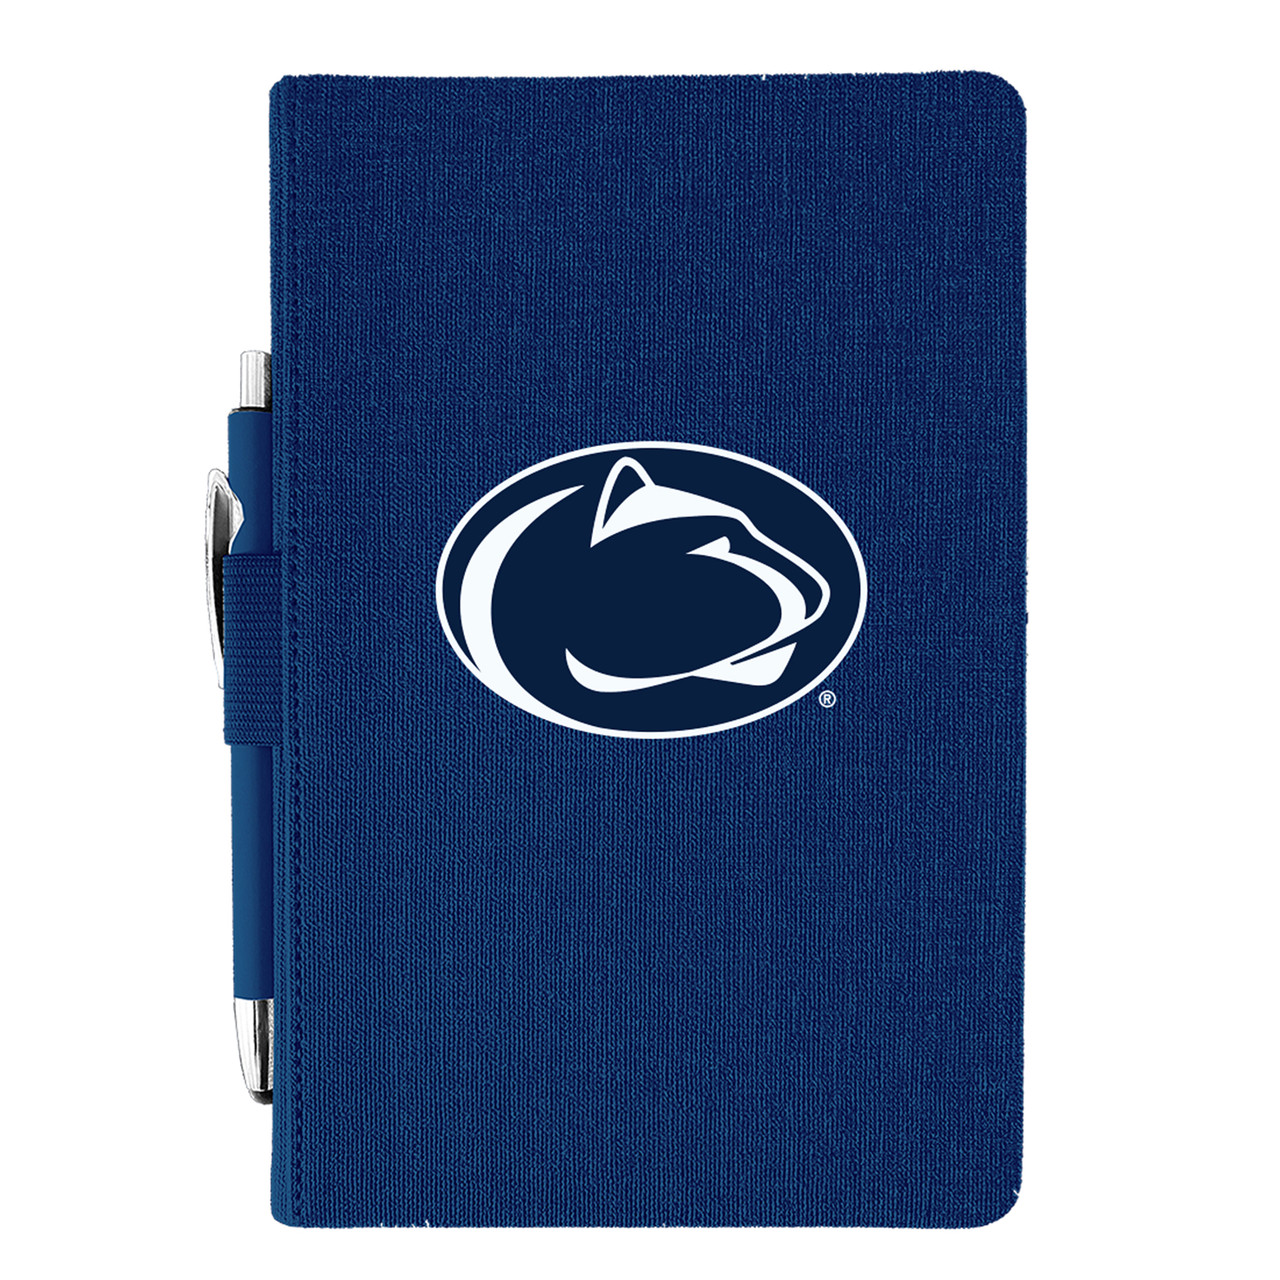 Penn State Nittany Lions Journal with Pen